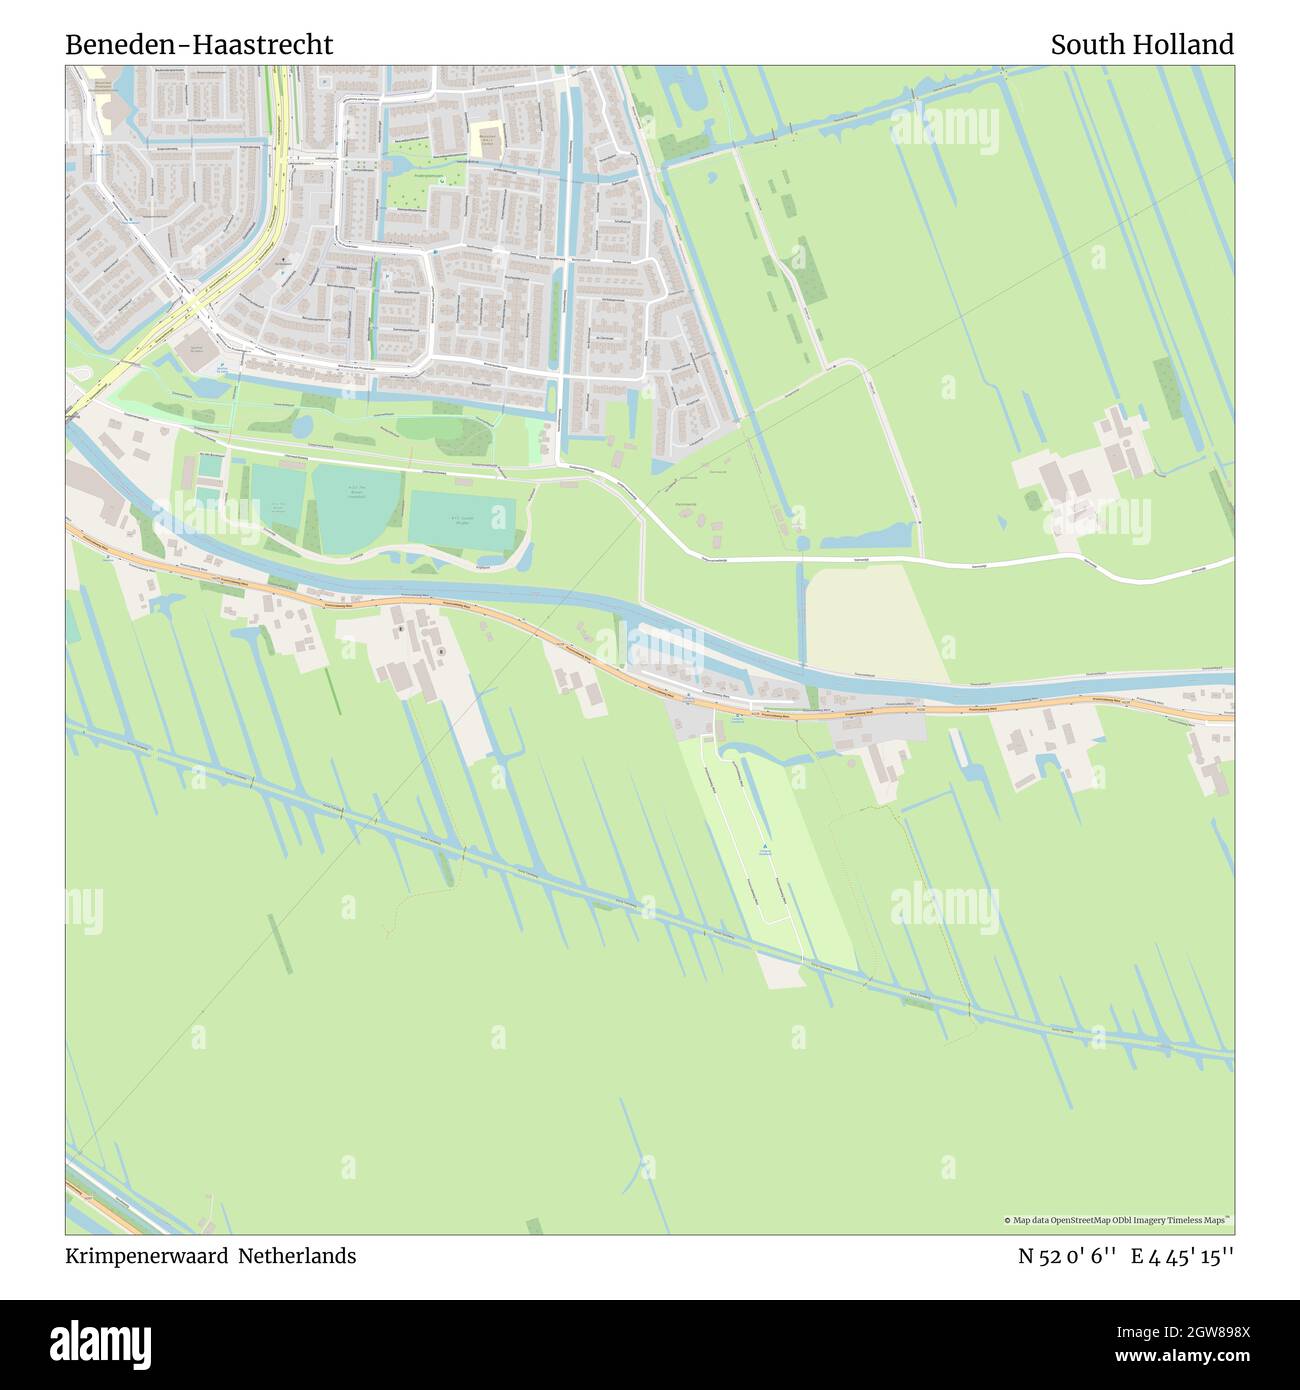 Beneden-Haastrecht, Krimpenerwaard, Netherlands, South Holland, N 52 0' 6'', E 4 45' 15'', map, Timeless Map published in 2021. Travelers, explorers and adventurers like Florence Nightingale, David Livingstone, Ernest Shackleton, Lewis and Clark and Sherlock Holmes relied on maps to plan travels to the world's most remote corners, Timeless Maps is mapping most locations on the globe, showing the achievement of great dreams Stock Photo